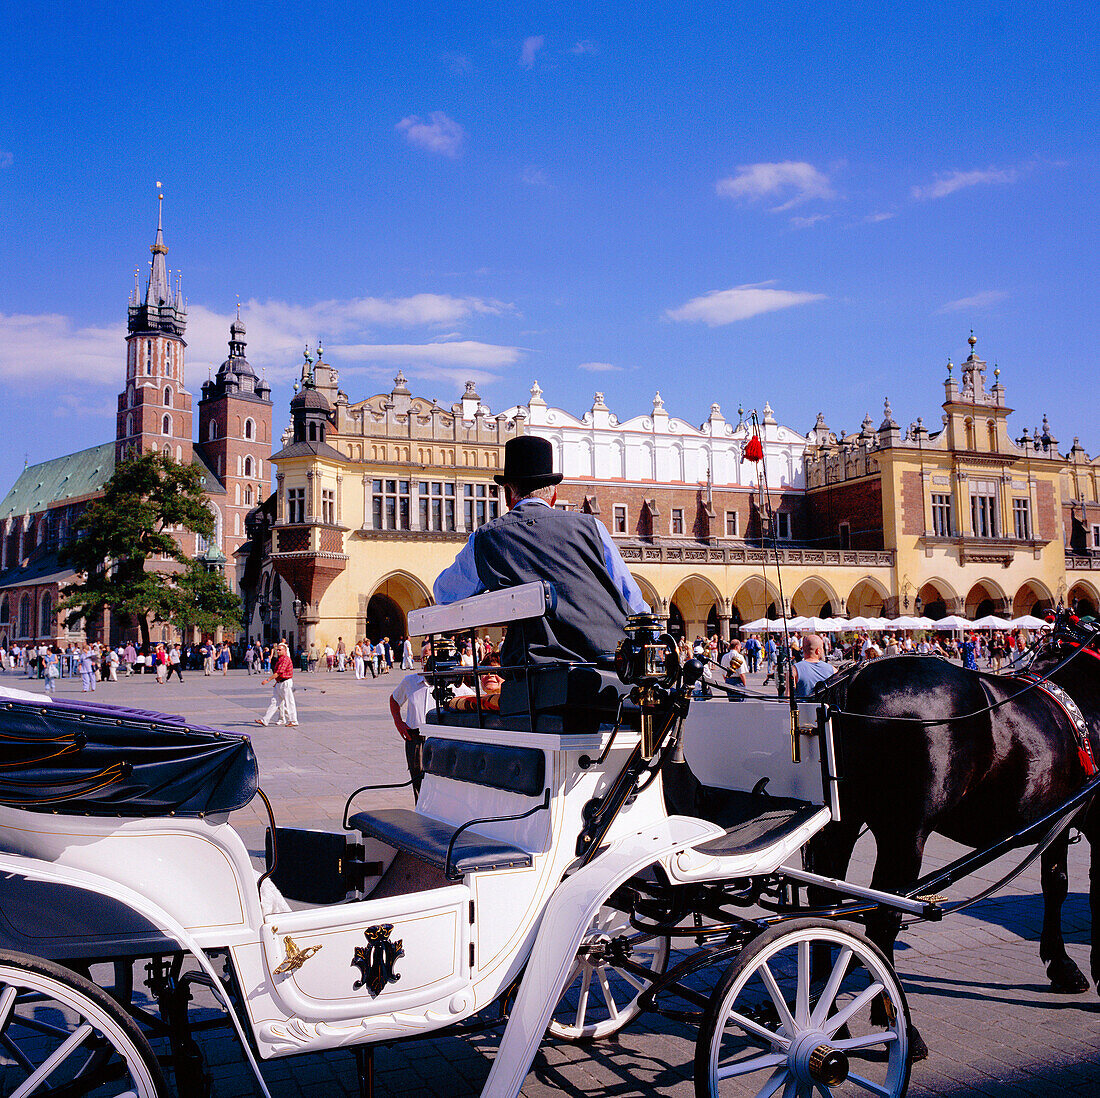 HORSE-CARRIAGE & CLOTH HALL IN MAIN SQUARE, KRAKOW, POLAND